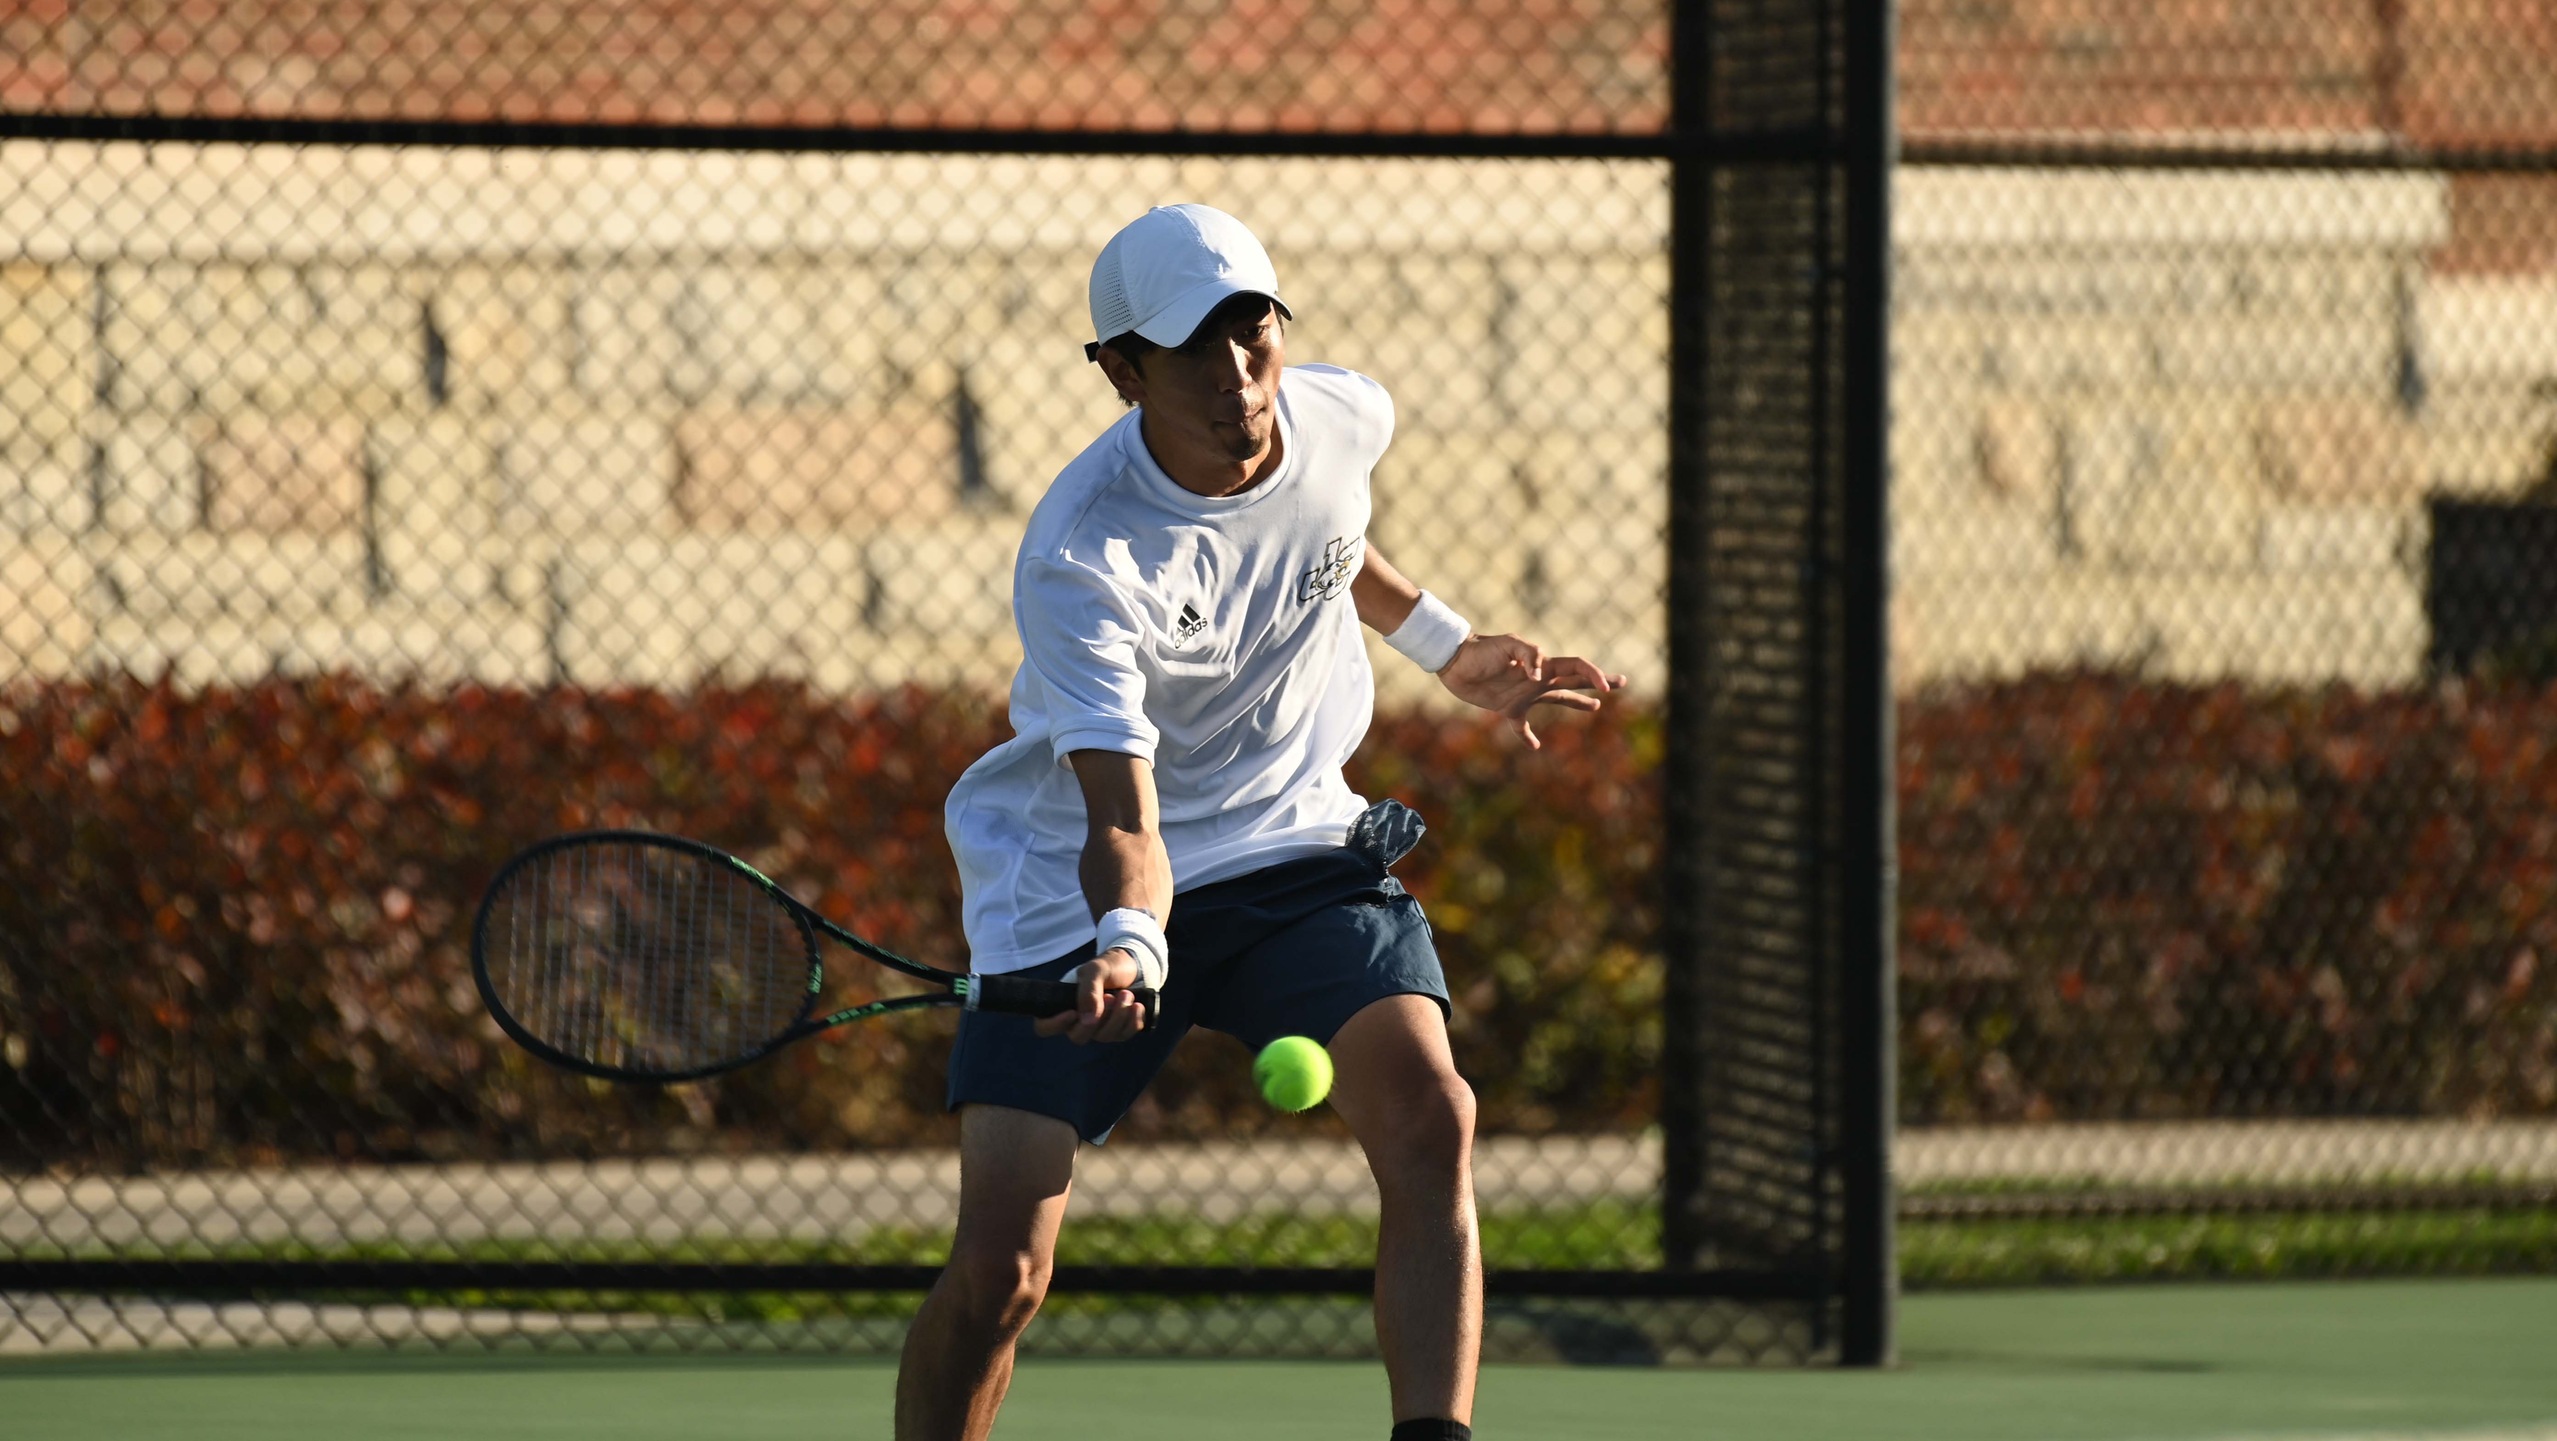 Eagles Sweep Defenders in First Match of Spring Season